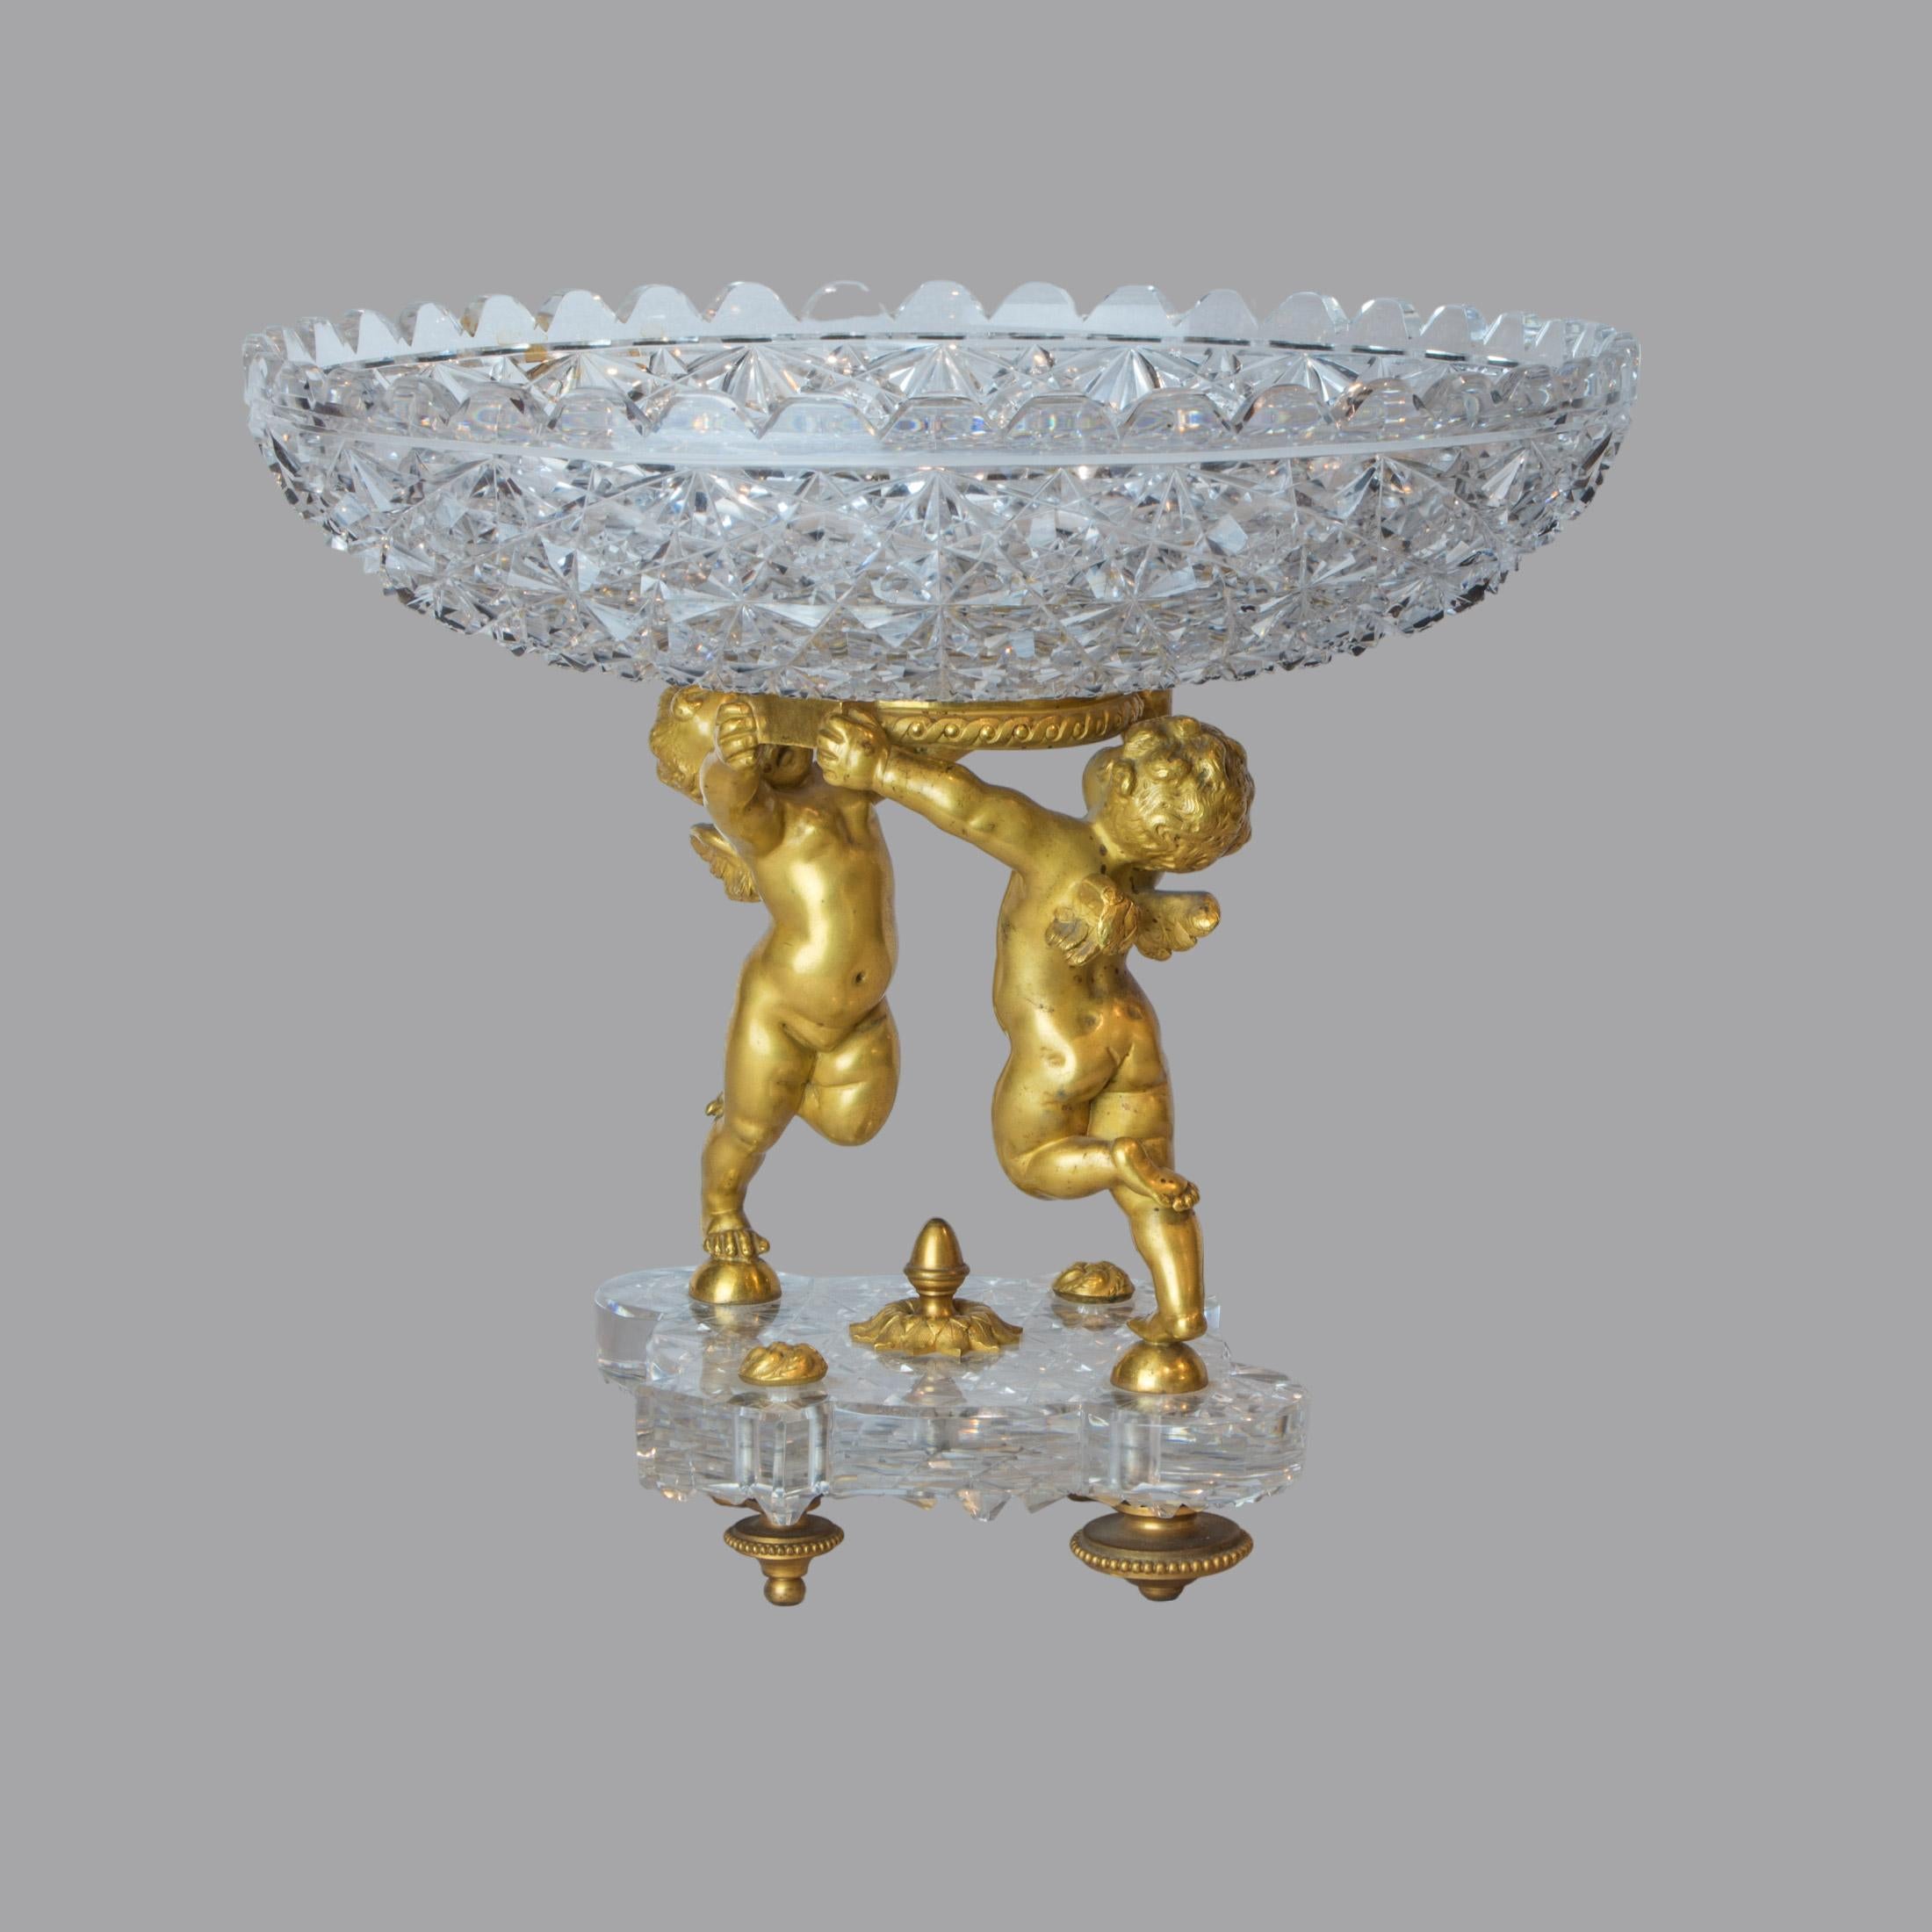 Highly  Important Baccarat 19th Century Cut Crystal and Ormolu Garniture For Sale 11